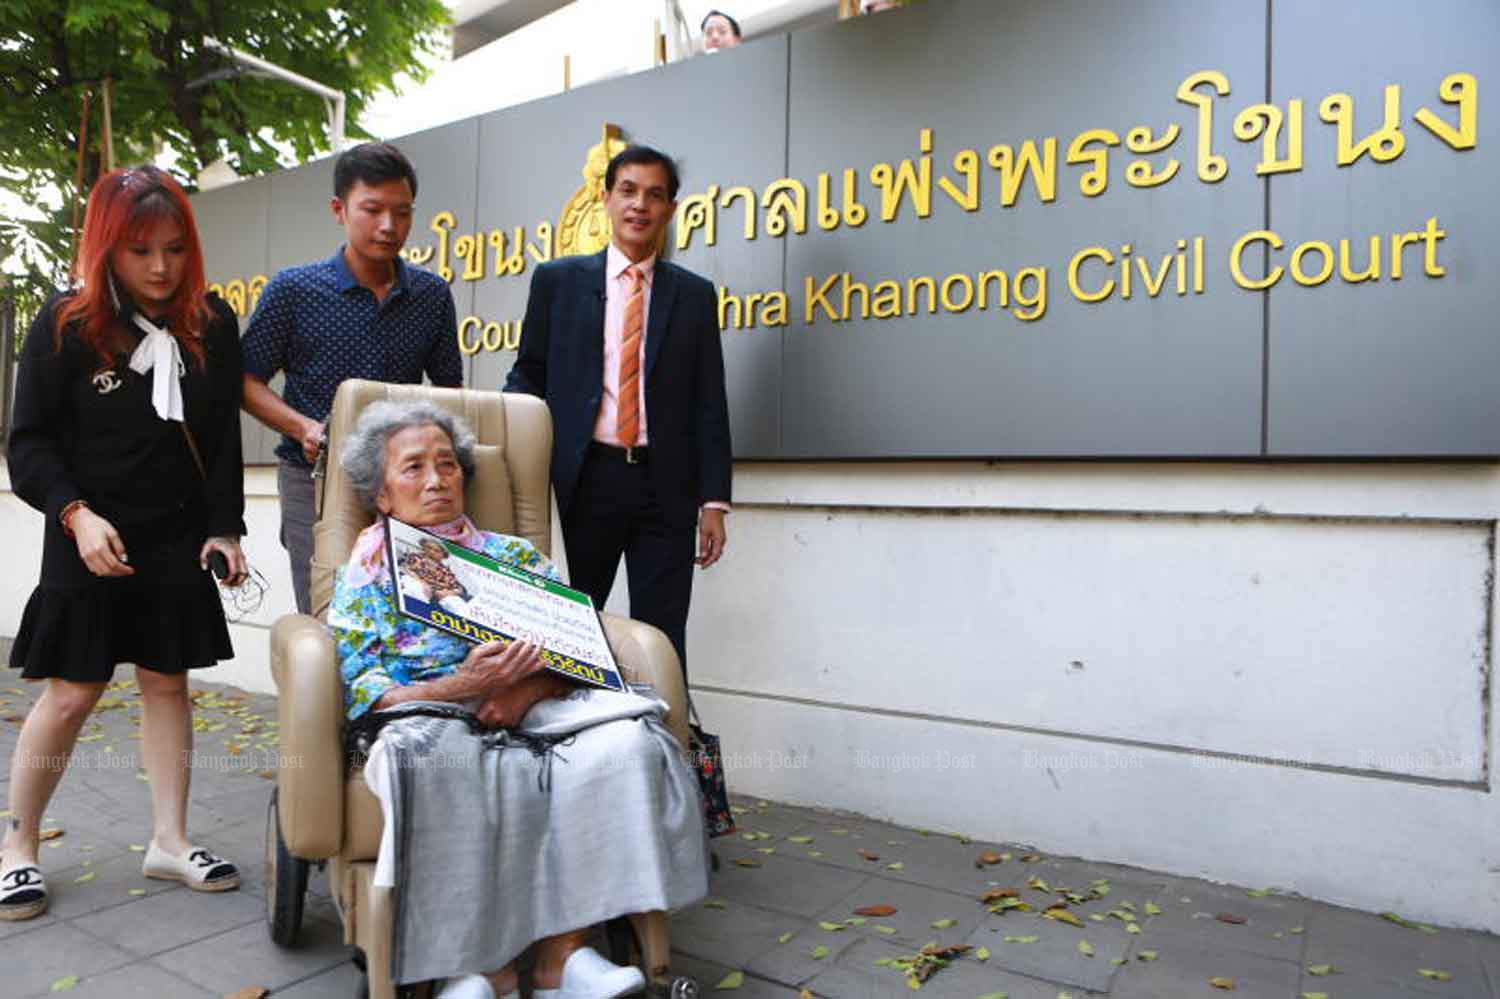 The daughter of an 85-year-old woman has been sentenced to 20 years in prison for stealing more than 250 million baht ($7.2 million) from her bedridden mother.